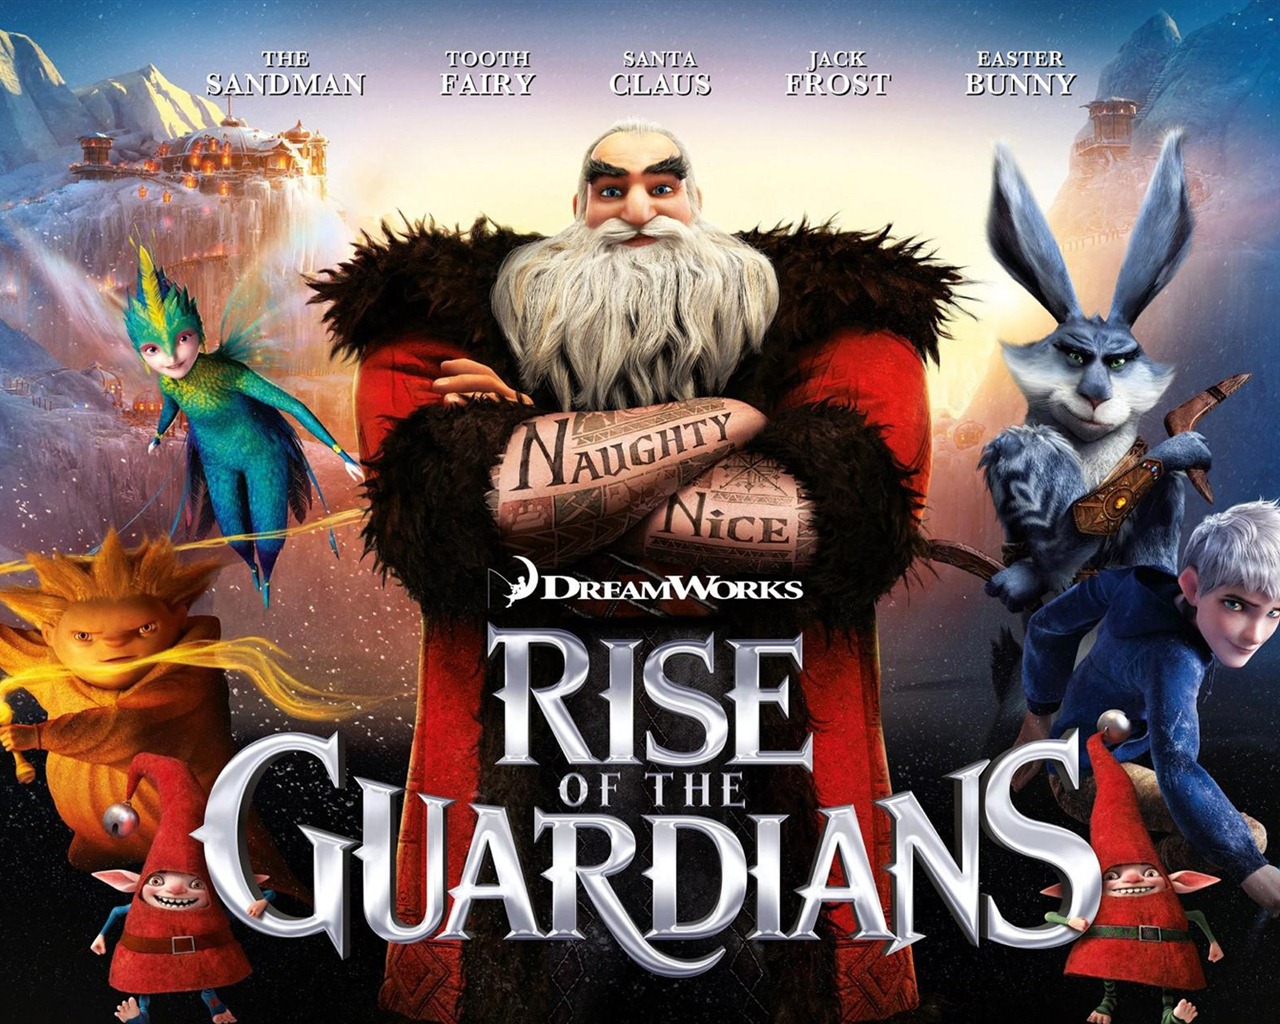 Rise of the Guardians 守護者聯盟 高清壁紙 #11 - 1280x1024